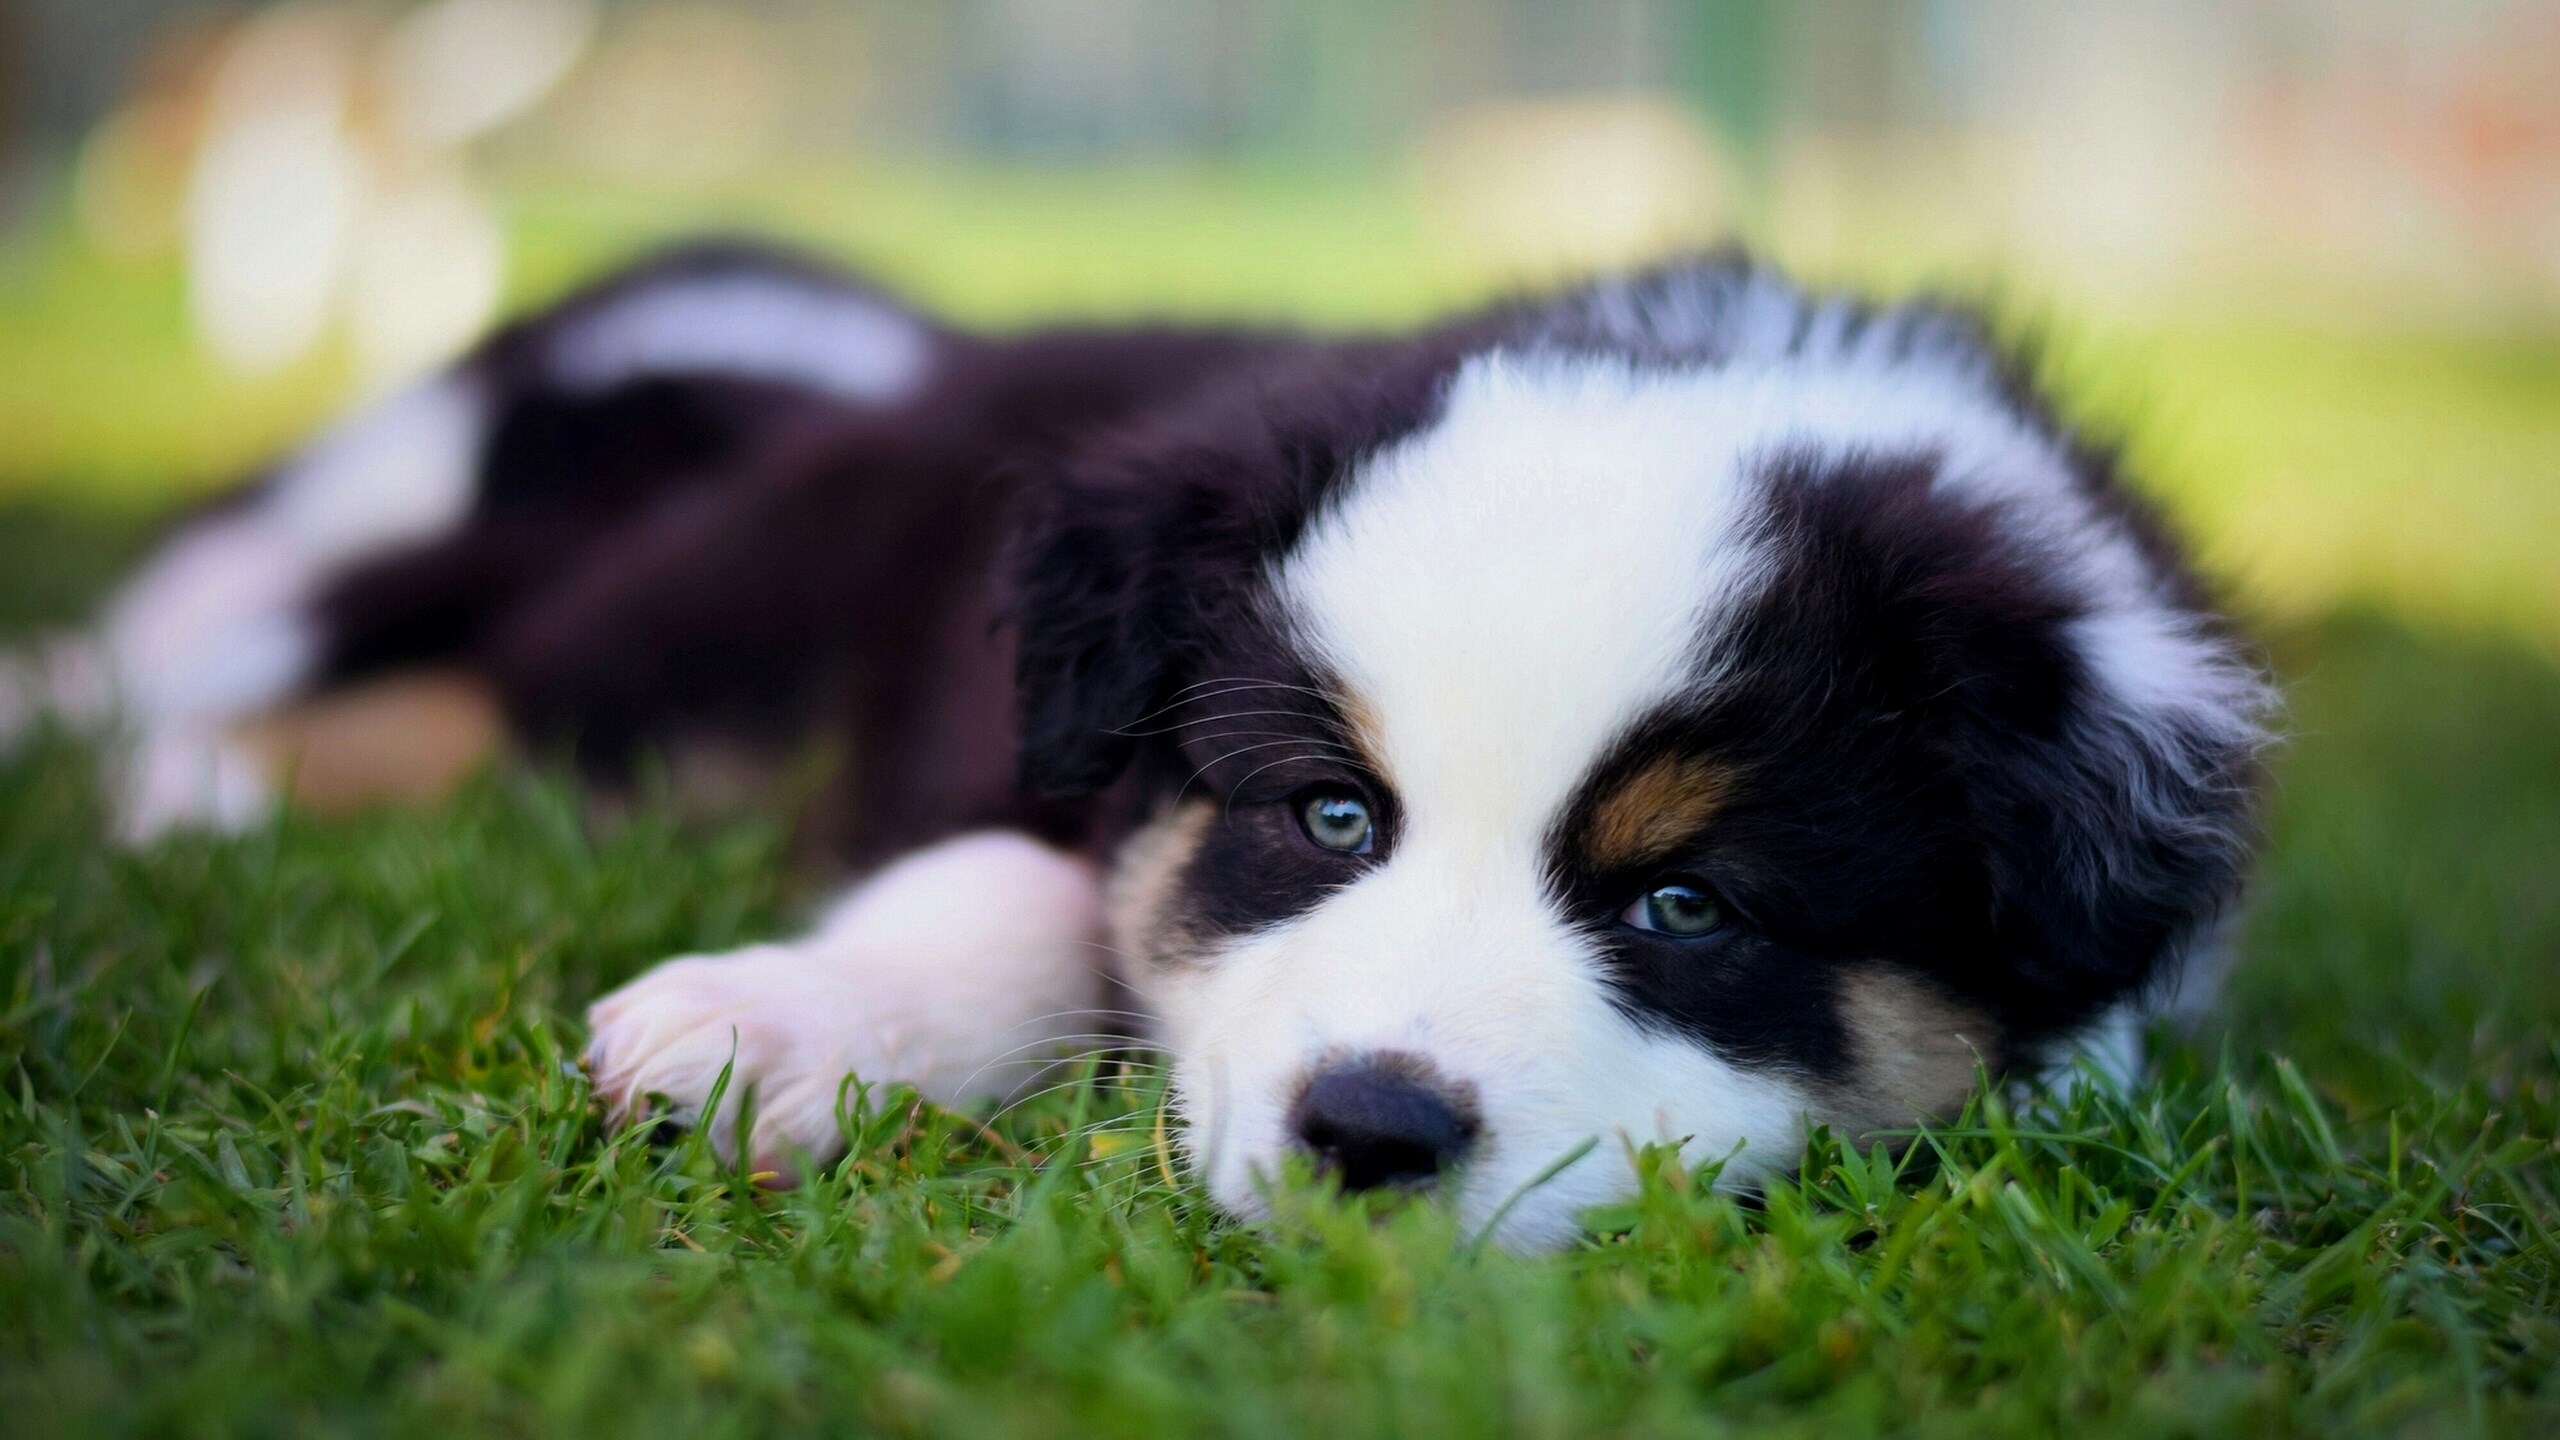 Cute puppy dog wallpaper p k k hd wallpapers backgrounds free download rare gallery